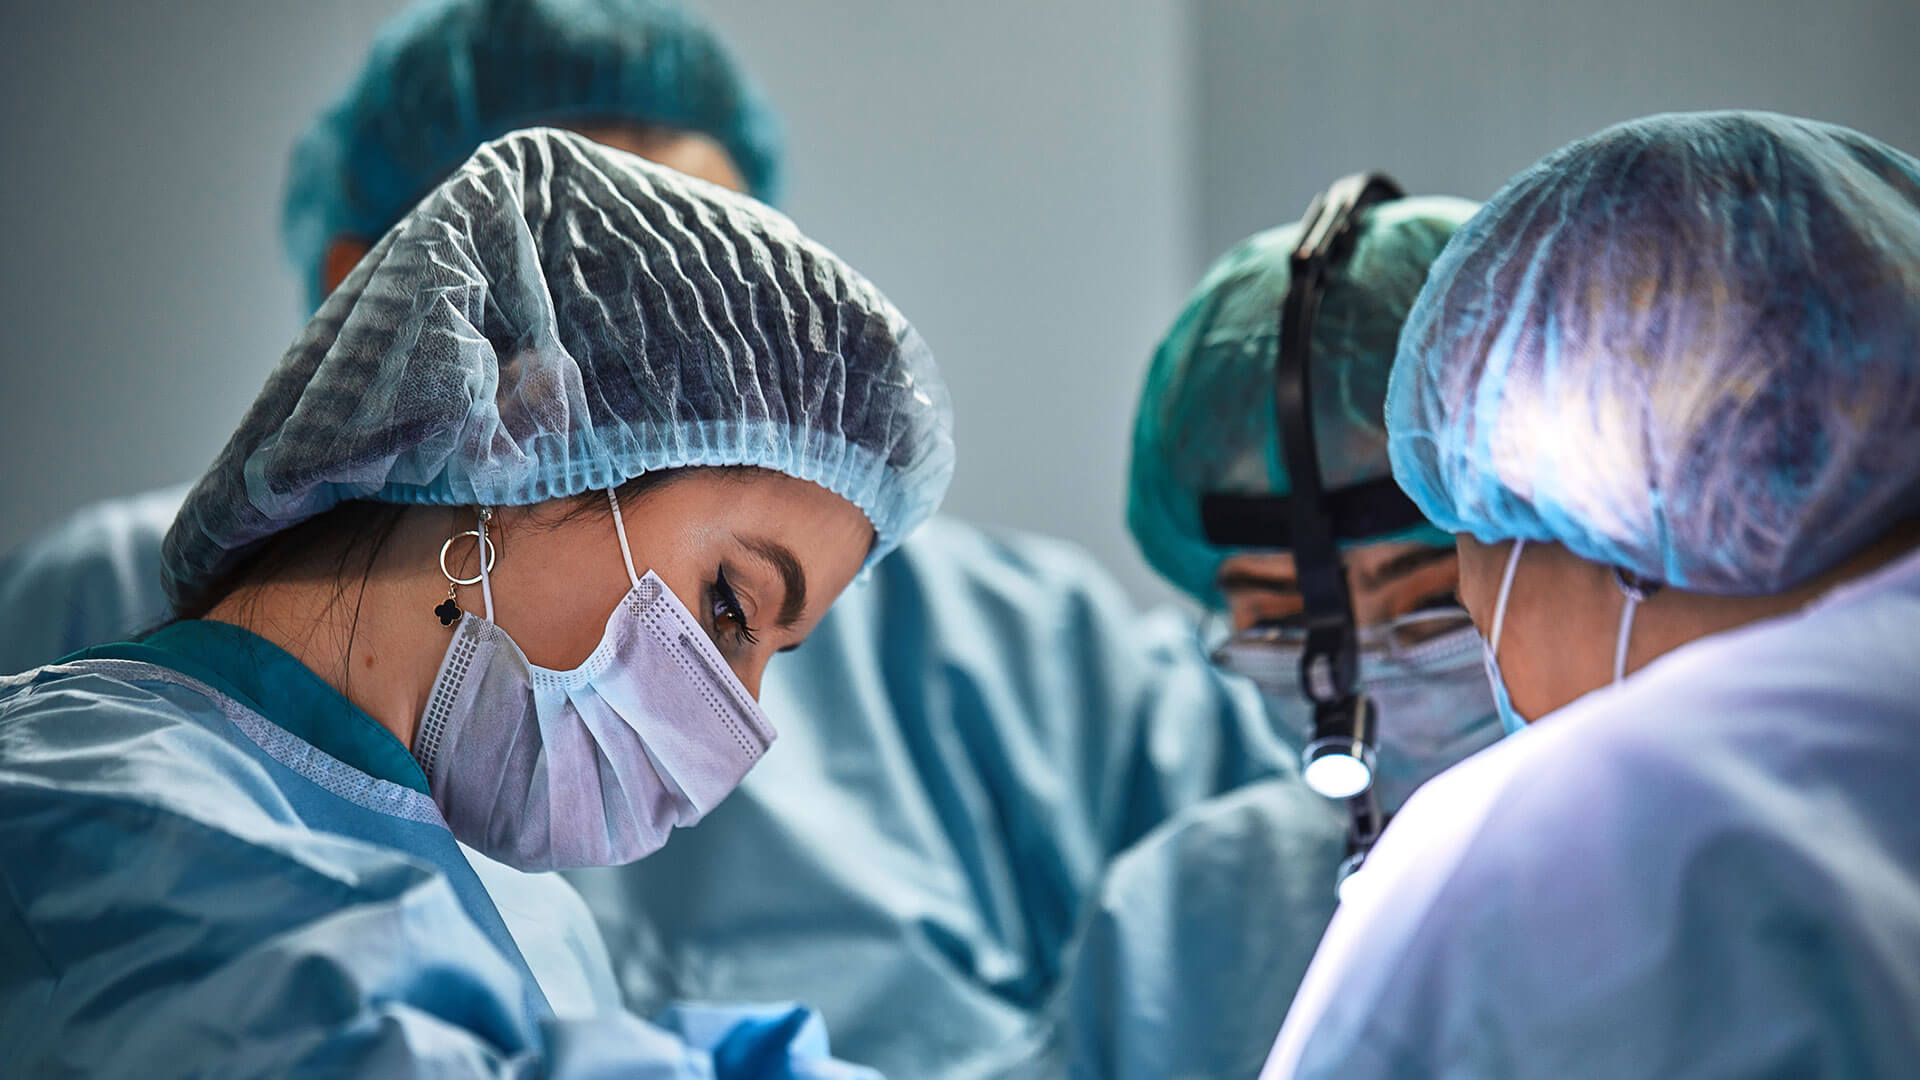 Surgeon and assistants in operating room